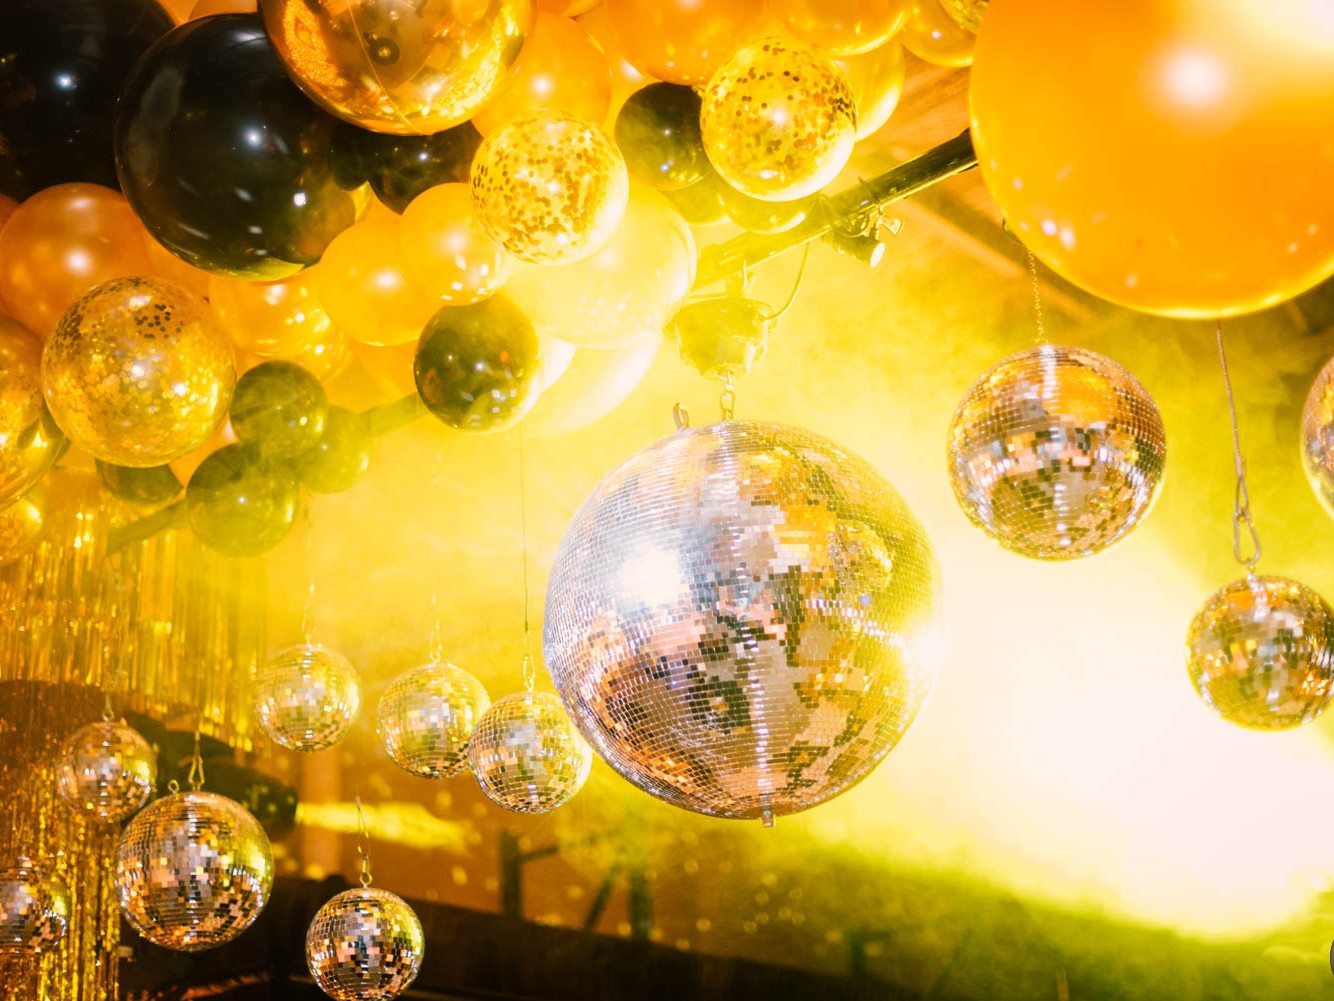 studio 54 themed party with silver mirror balls